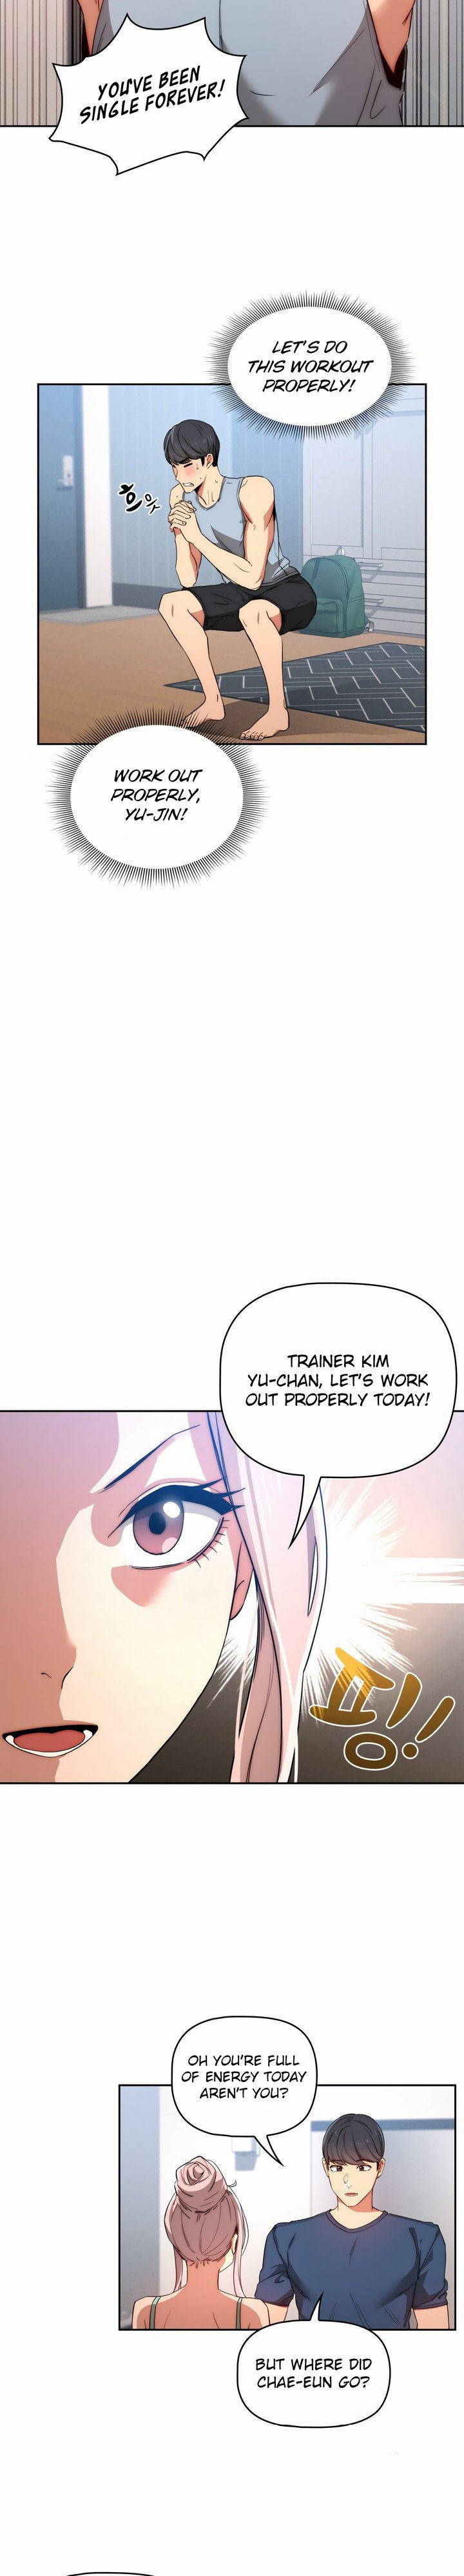 private-tutoring-in-these-trying-times-chap-34-11